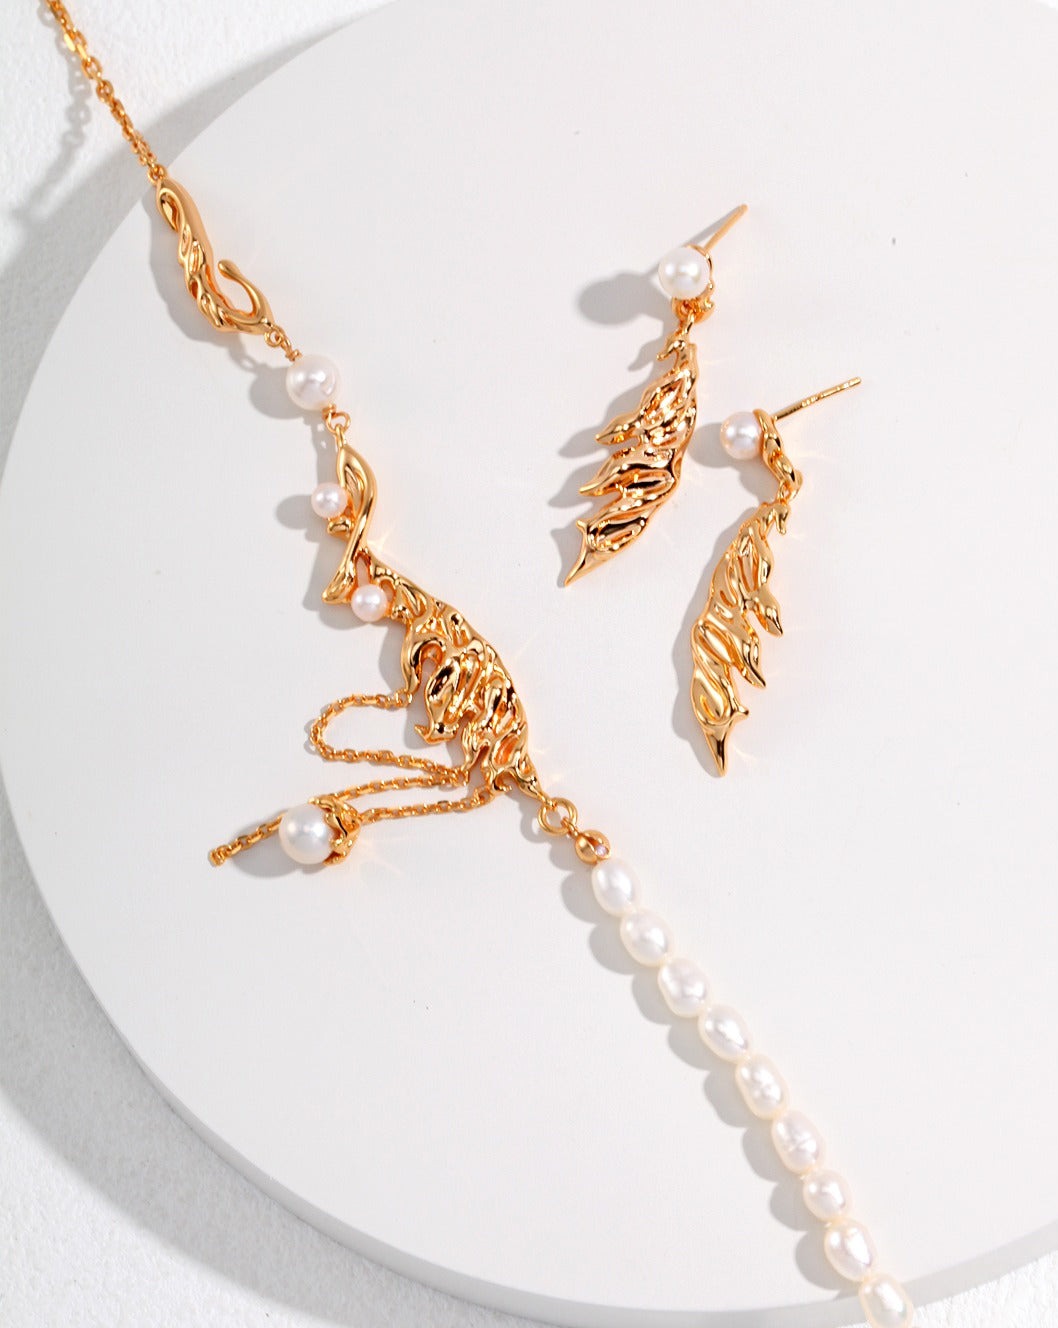 fashion-jewelry-minimalist-jewelry-design-jewelry-set-necklace-pearl-earring-gold-coated-silver-bijoux-feather-shape-pearl-necklace-earrings-feather-in-the-wind-retro-gold